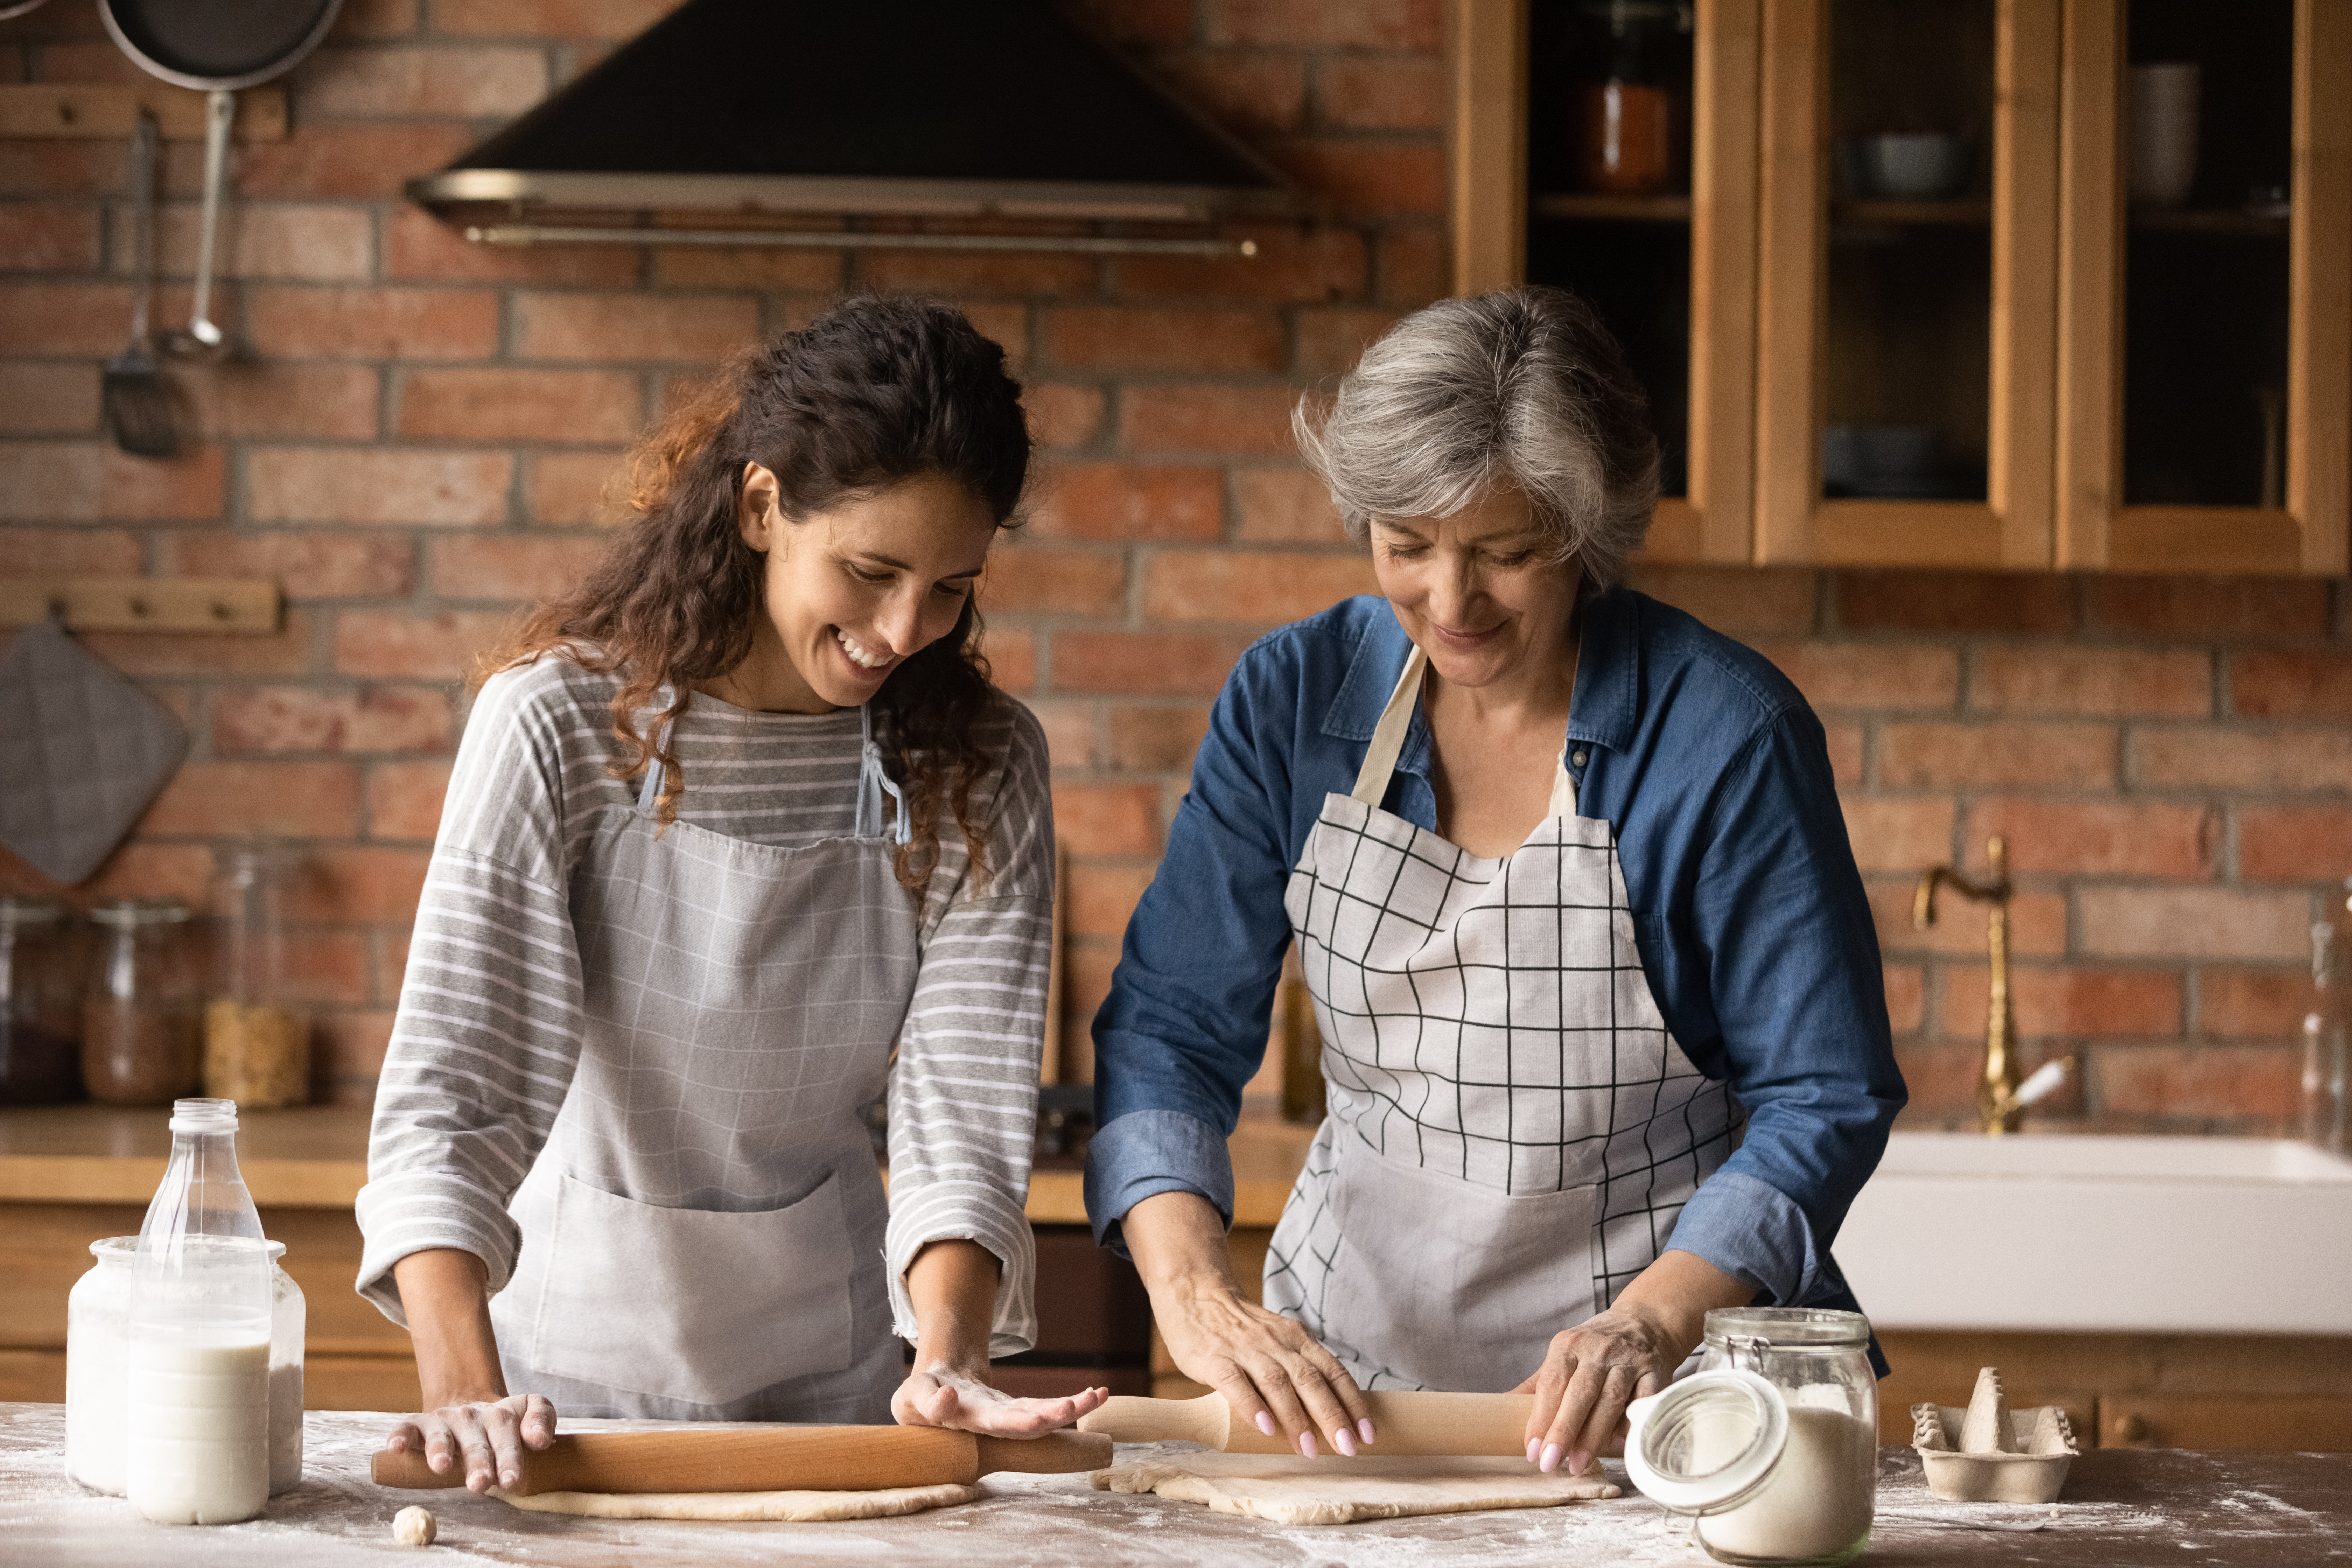 A young and an older women are cooking | Source: Shutterstock